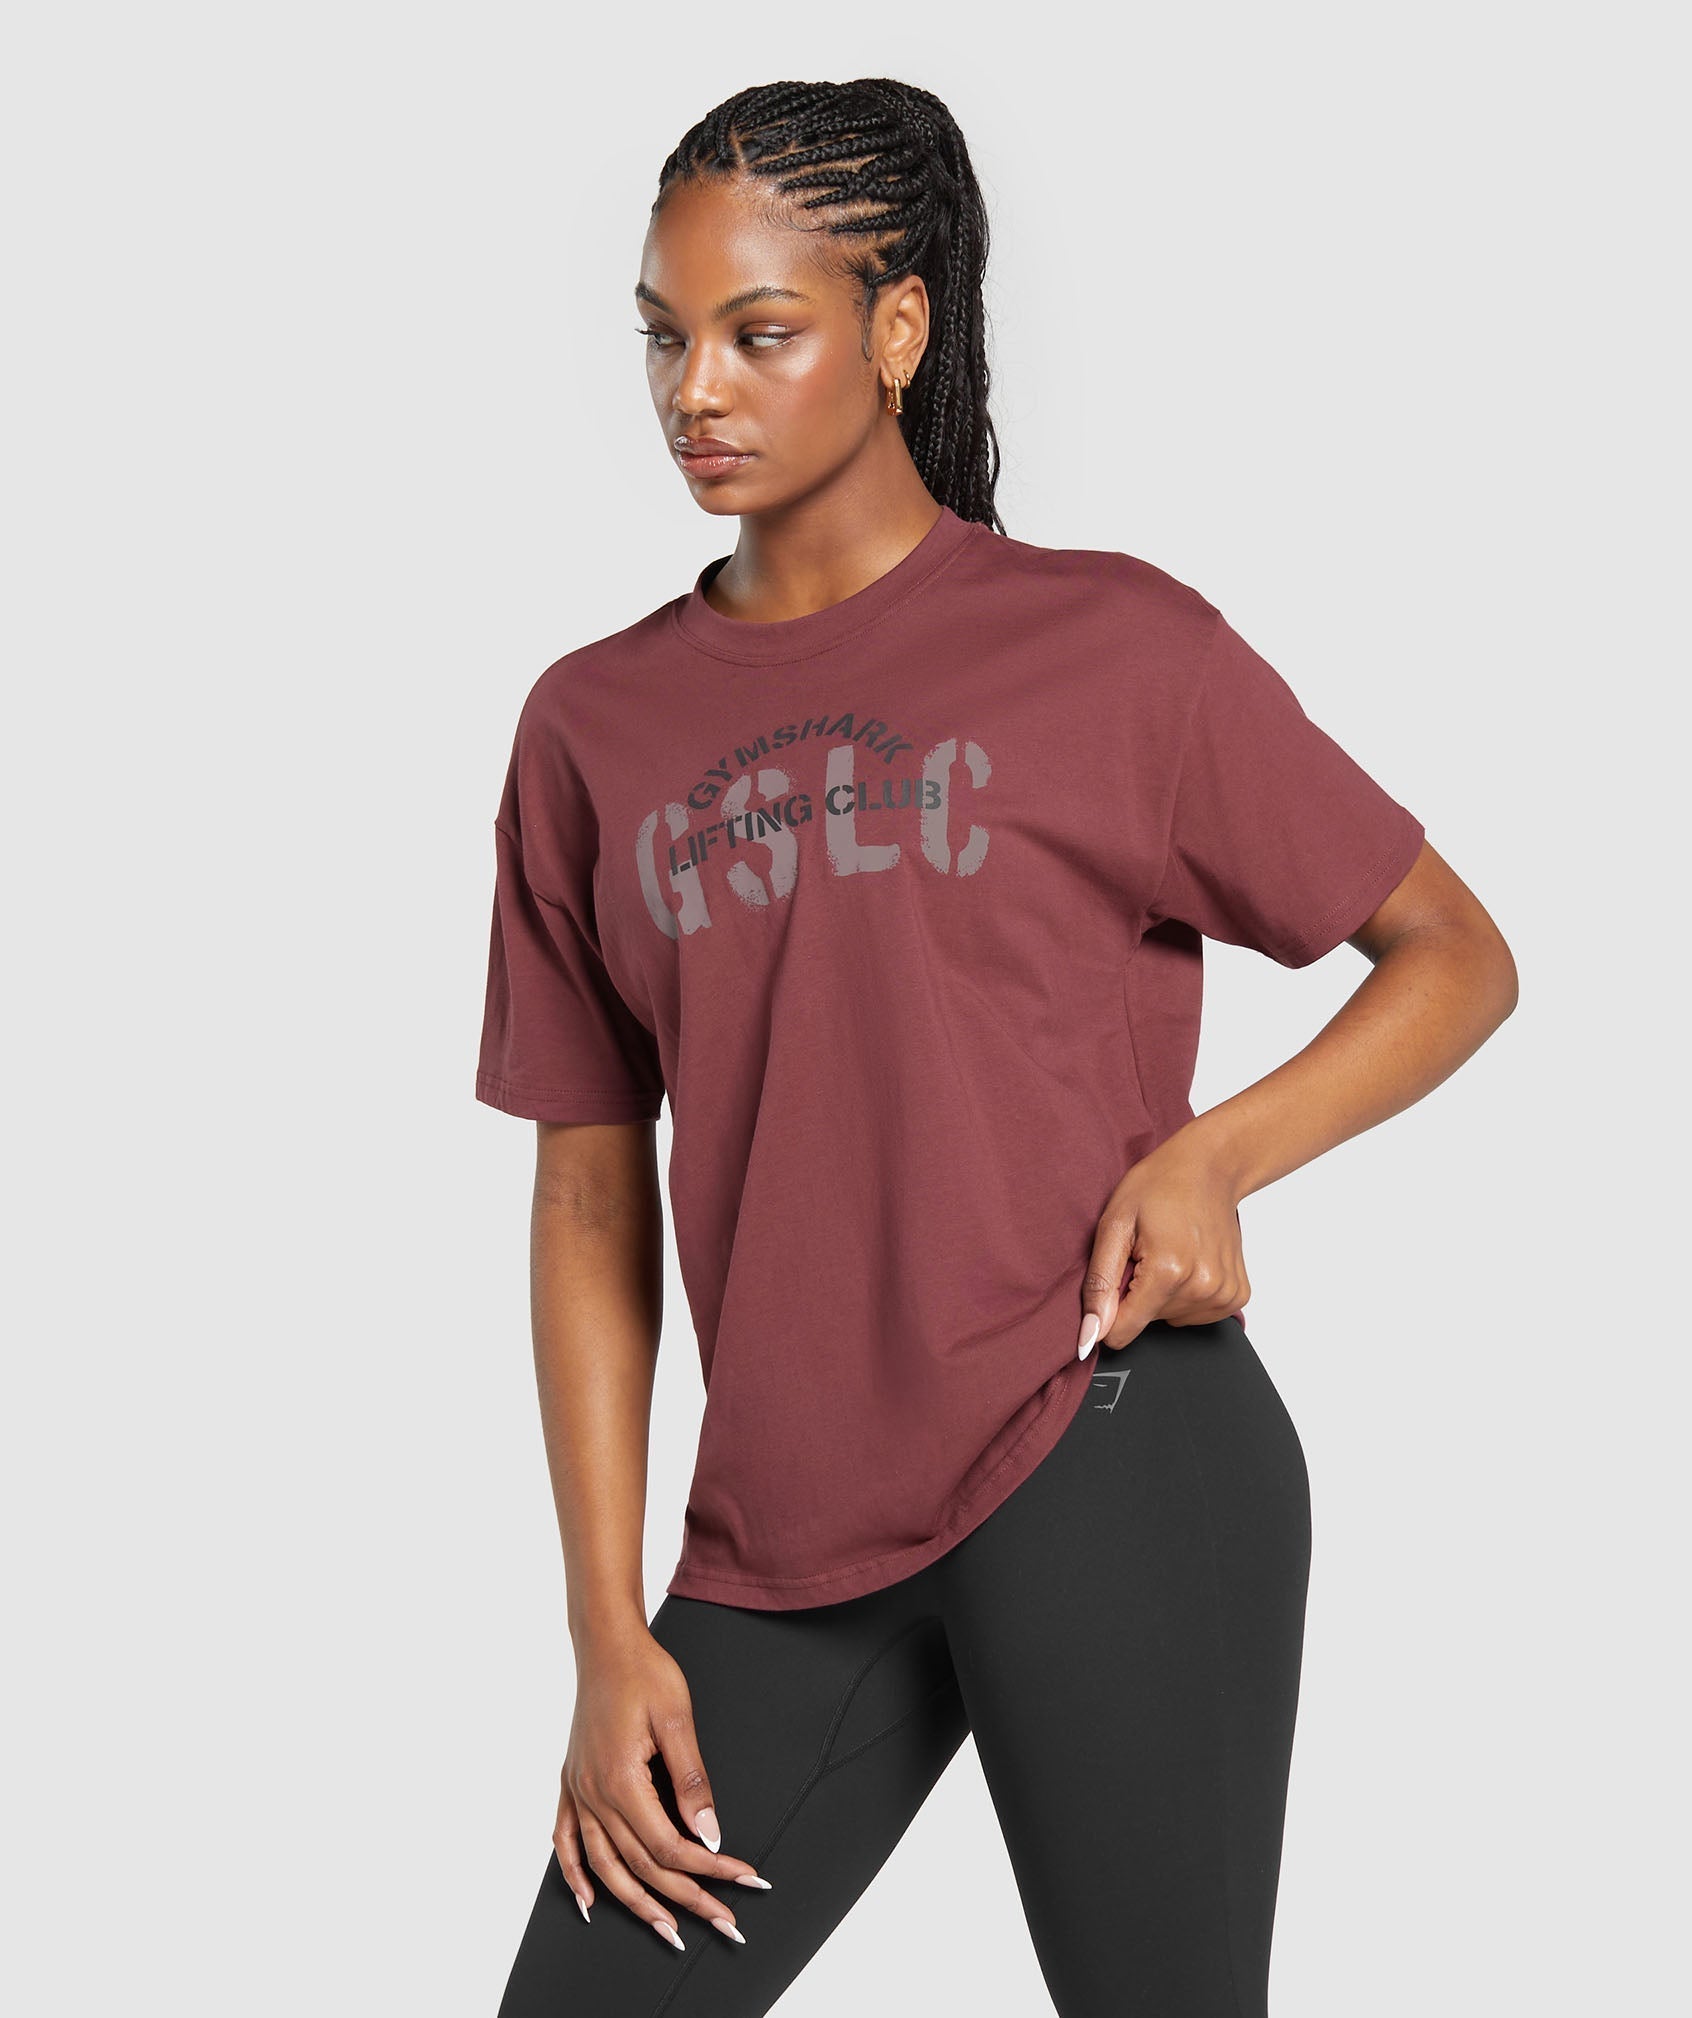 Built Oversized T-Shirt in Washed Burgundy - view 5